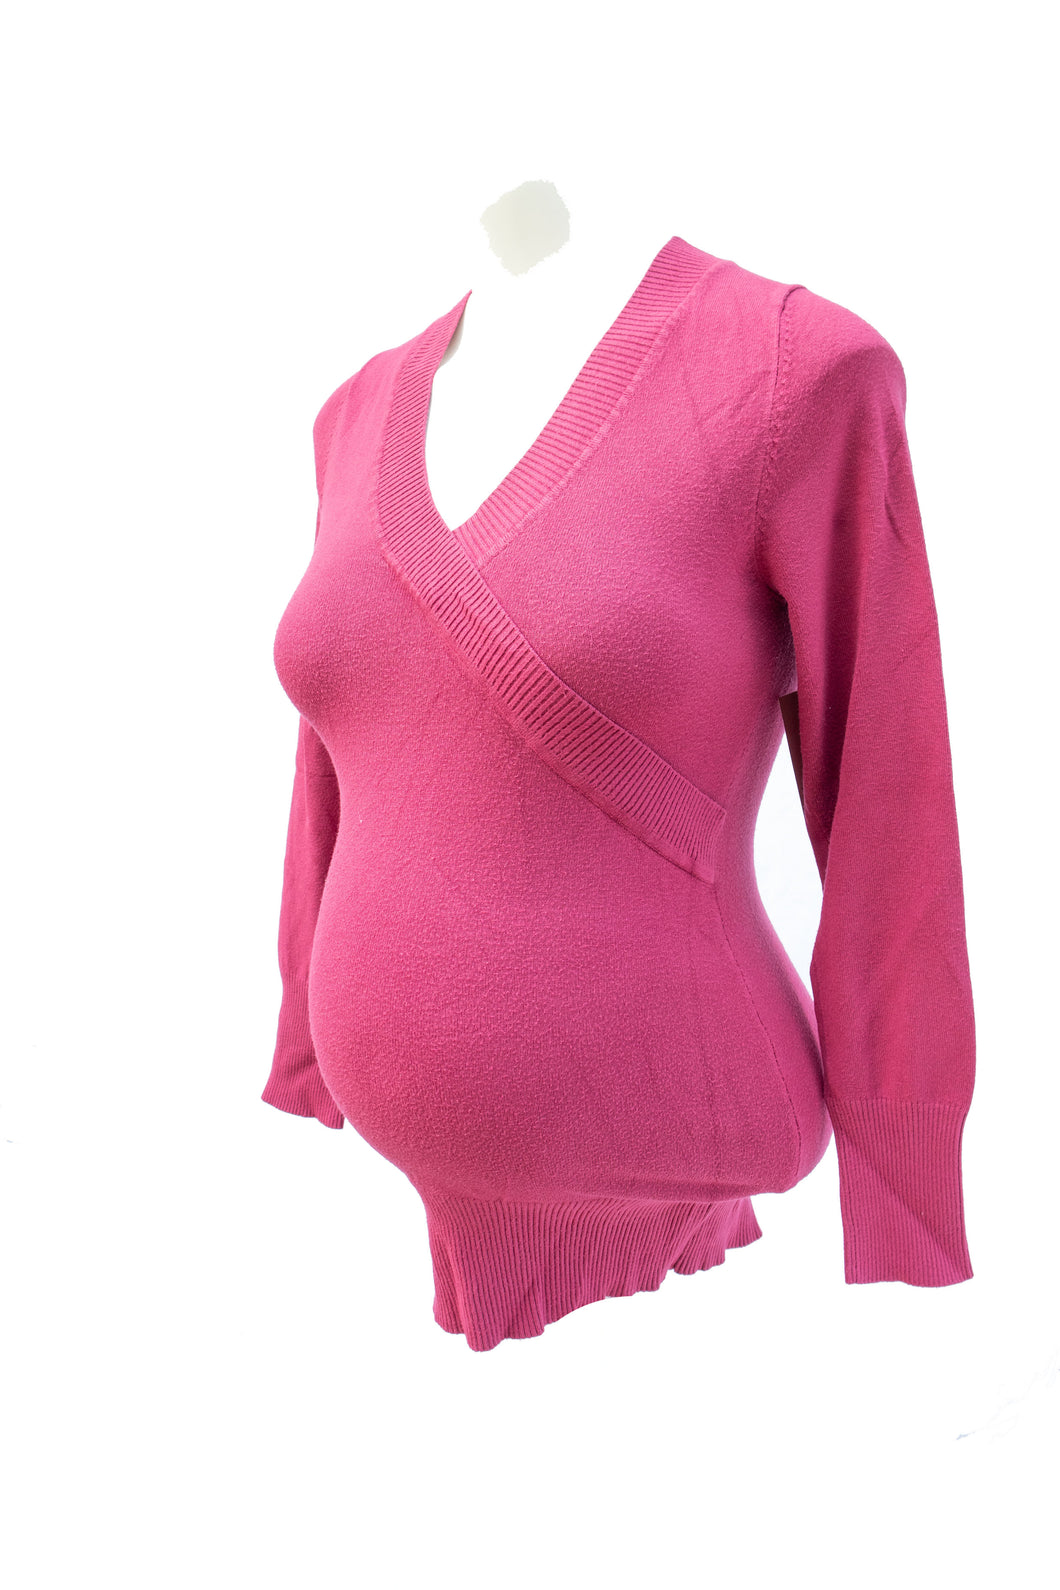 CLEARANCE S Thyme Maternity Knit Sweater in Pink